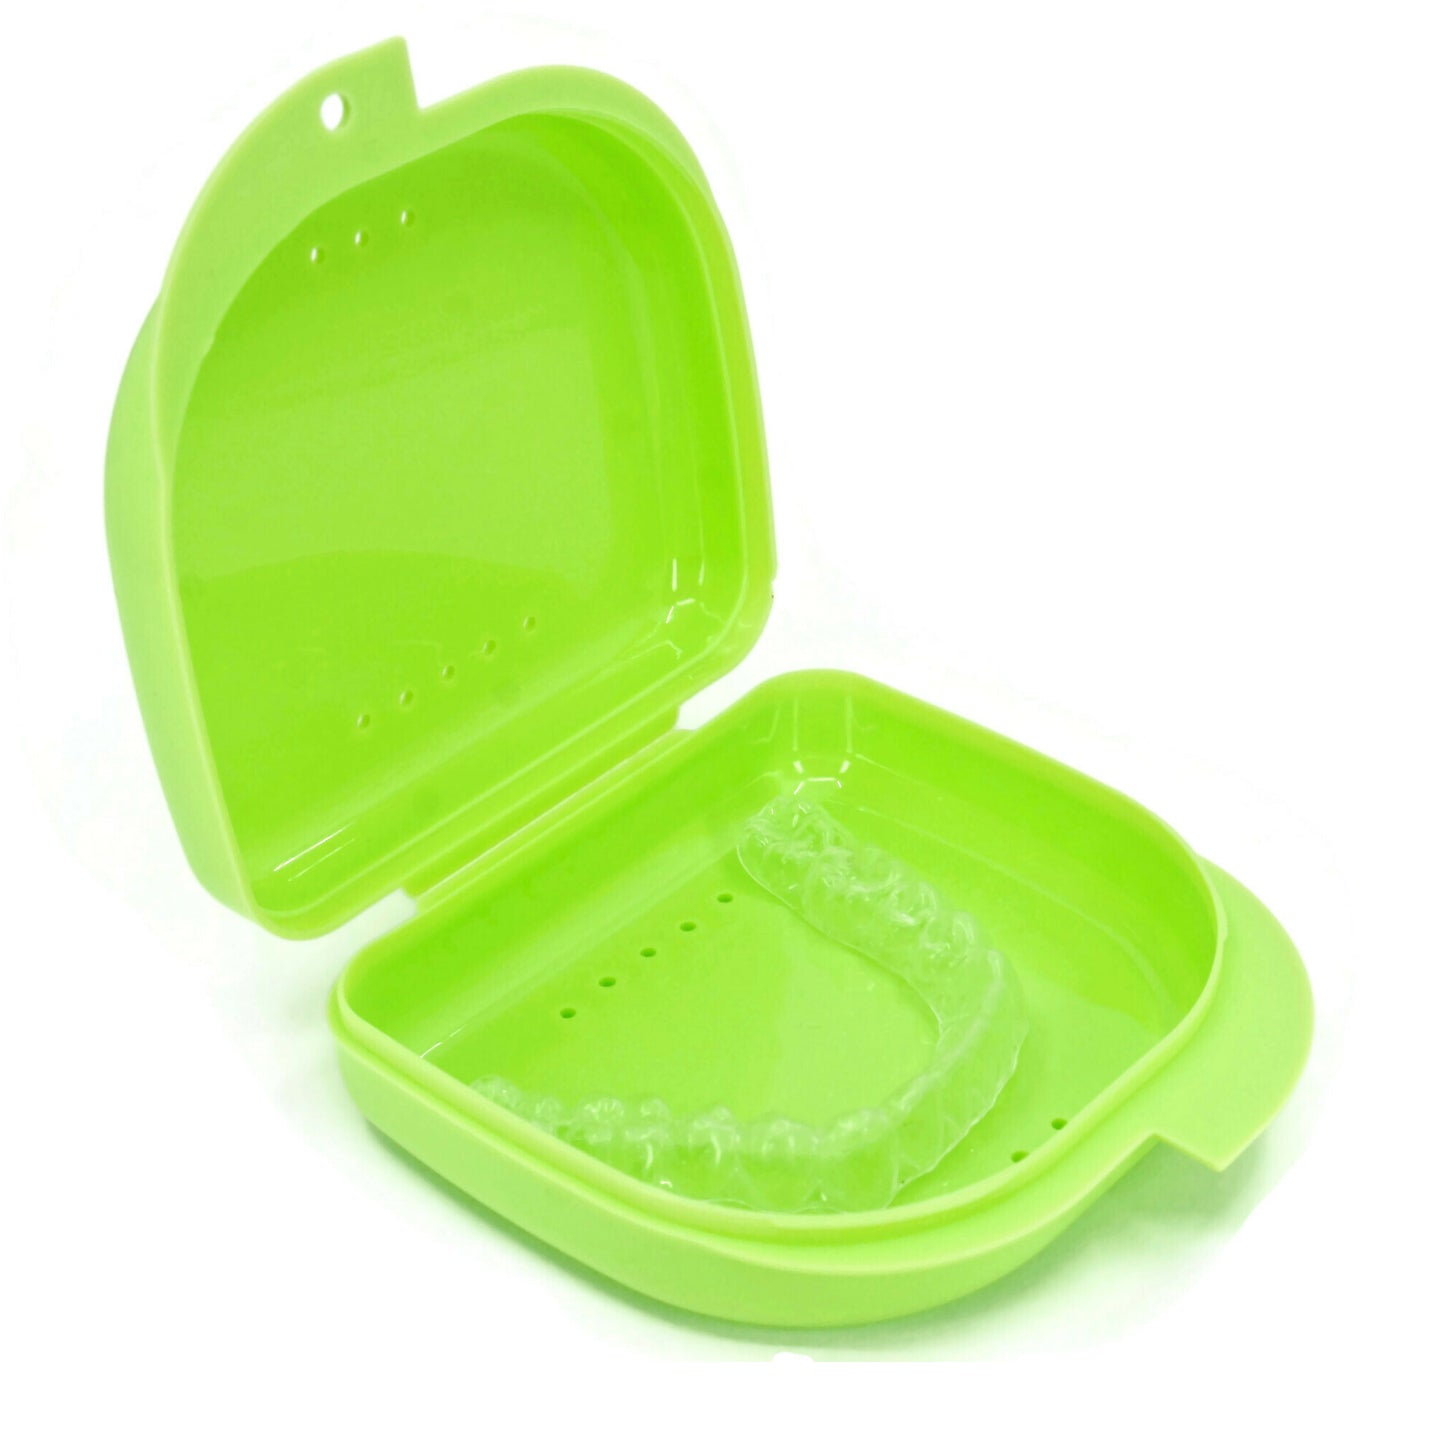 Retainer Case with Vent Holes, Mouth Guard Case, Aligner Case